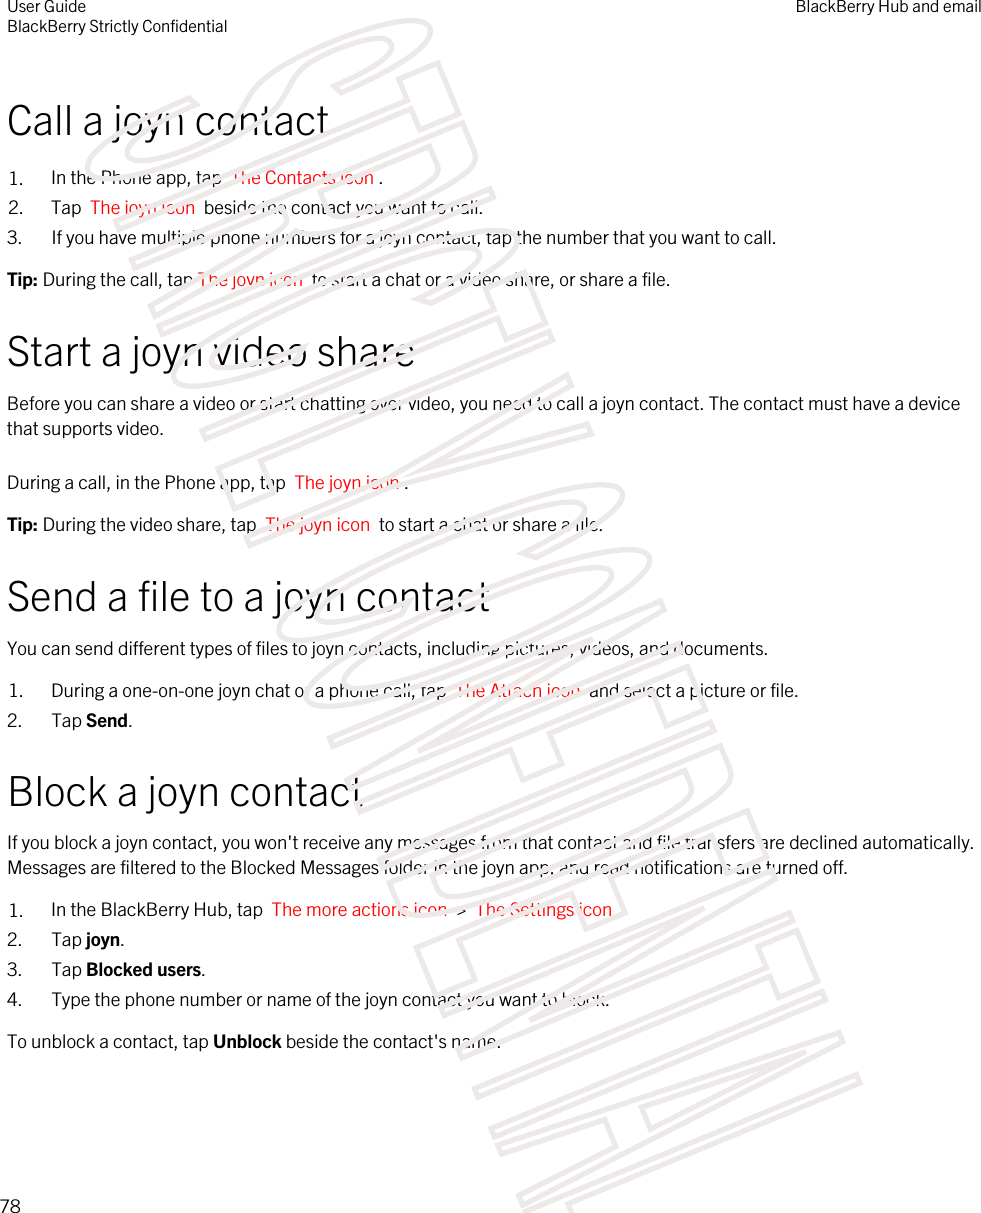 Call a joyn contact1. In the Phone app, tap  The Contacts icon .2. Tap  The joyn icon  beside the contact you want to call.3. If you have multiple phone numbers for a joyn contact, tap the number that you want to call.Tip: During the call, tap The joyn icon  to start a chat or a video share, or share a file.Start a joyn video shareBefore you can share a video or start chatting over video, you need to call a joyn contact. The contact must have a device that supports video.During a call, in the Phone app, tap  The joyn icon . Tip: During the video share, tap  The joyn icon  to start a chat or share a file.Send a file to a joyn contactYou can send different types of files to joyn contacts, including pictures, videos, and documents.1. During a one-on-one joyn chat or a phone call, tap  The Attach icon  and select a picture or file.2. Tap Send.Block a joyn contactIf you block a joyn contact, you won&apos;t receive any messages from that contact and file transfers are declined automatically. Messages are filtered to the Blocked Messages folder in the joyn app, and read notifications are turned off.1. In the BlackBerry Hub, tap  The more actions icon  &gt;  The Settings icon . 2. Tap joyn.3. Tap Blocked users.4. Type the phone number or name of the joyn contact you want to block.To unblock a contact, tap Unblock beside the contact&apos;s name.User GuideBlackBerry Strictly Confidential BlackBerry Hub and email78STRICTLY CONFIDENTIAL